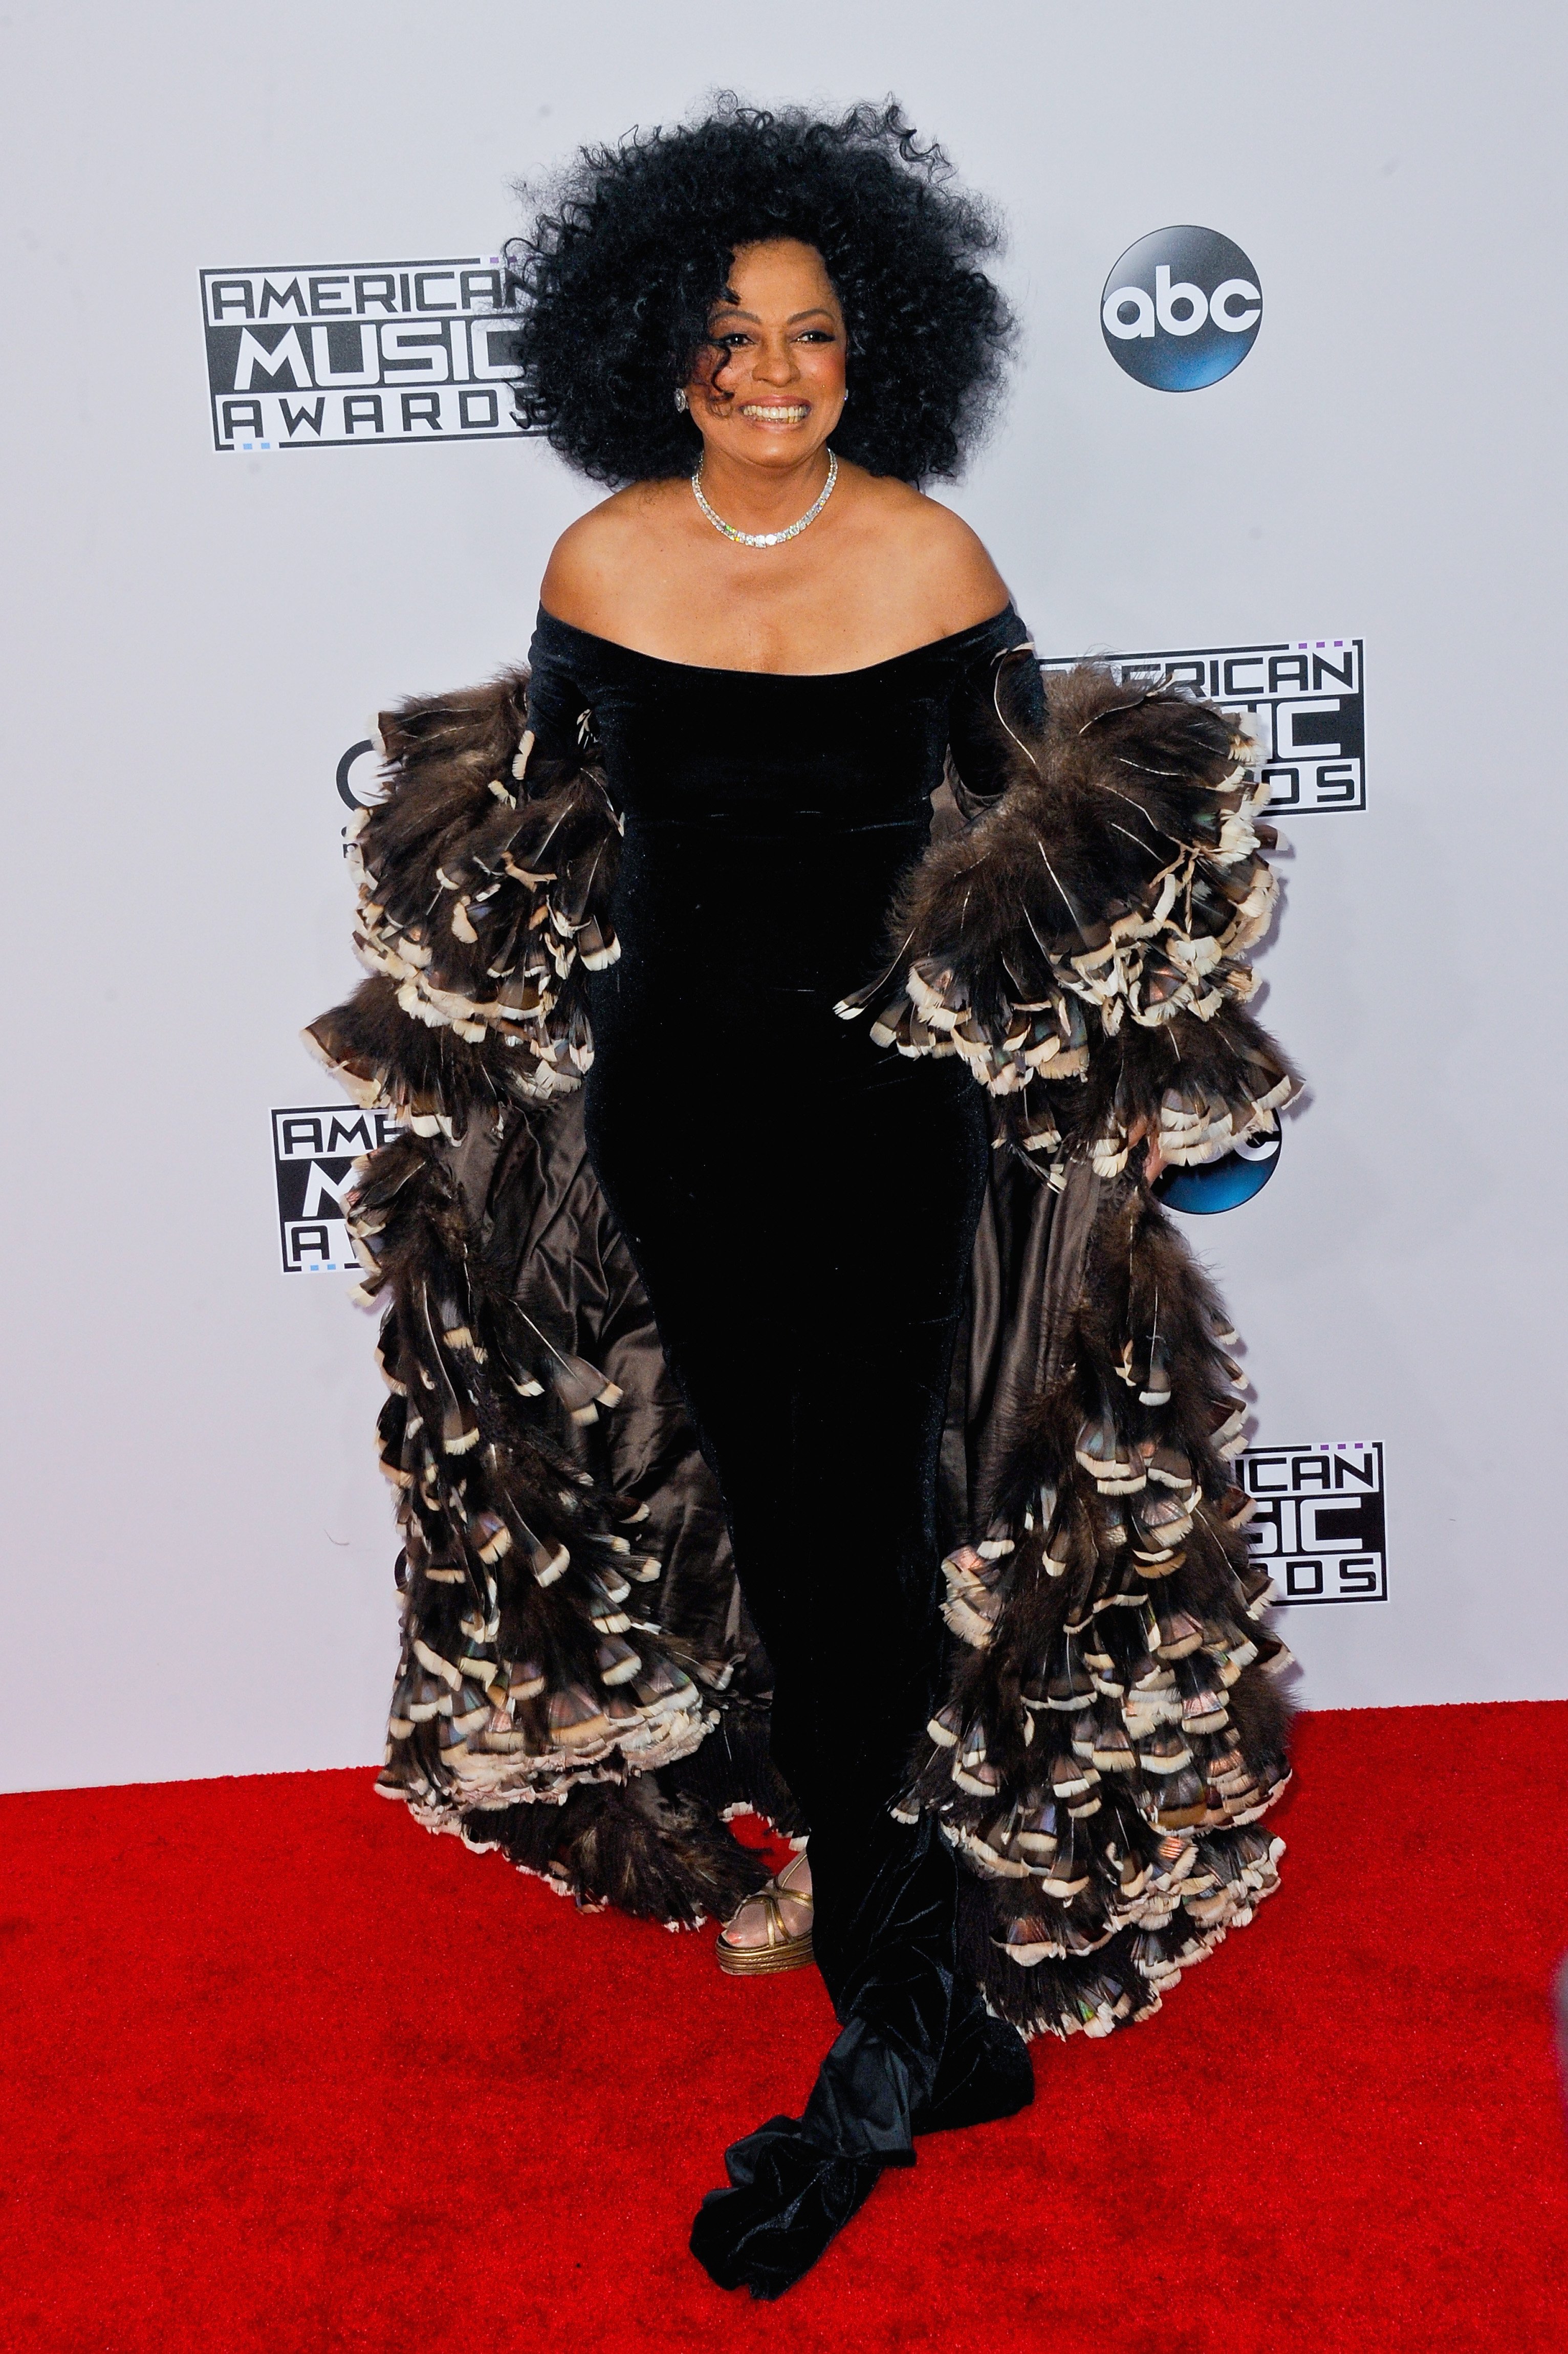 Diana Ross arrives for the 42nd Annual American Music Awards held at Nokia Theatre L.A. Live on November 23, 2014 in Los Angeles